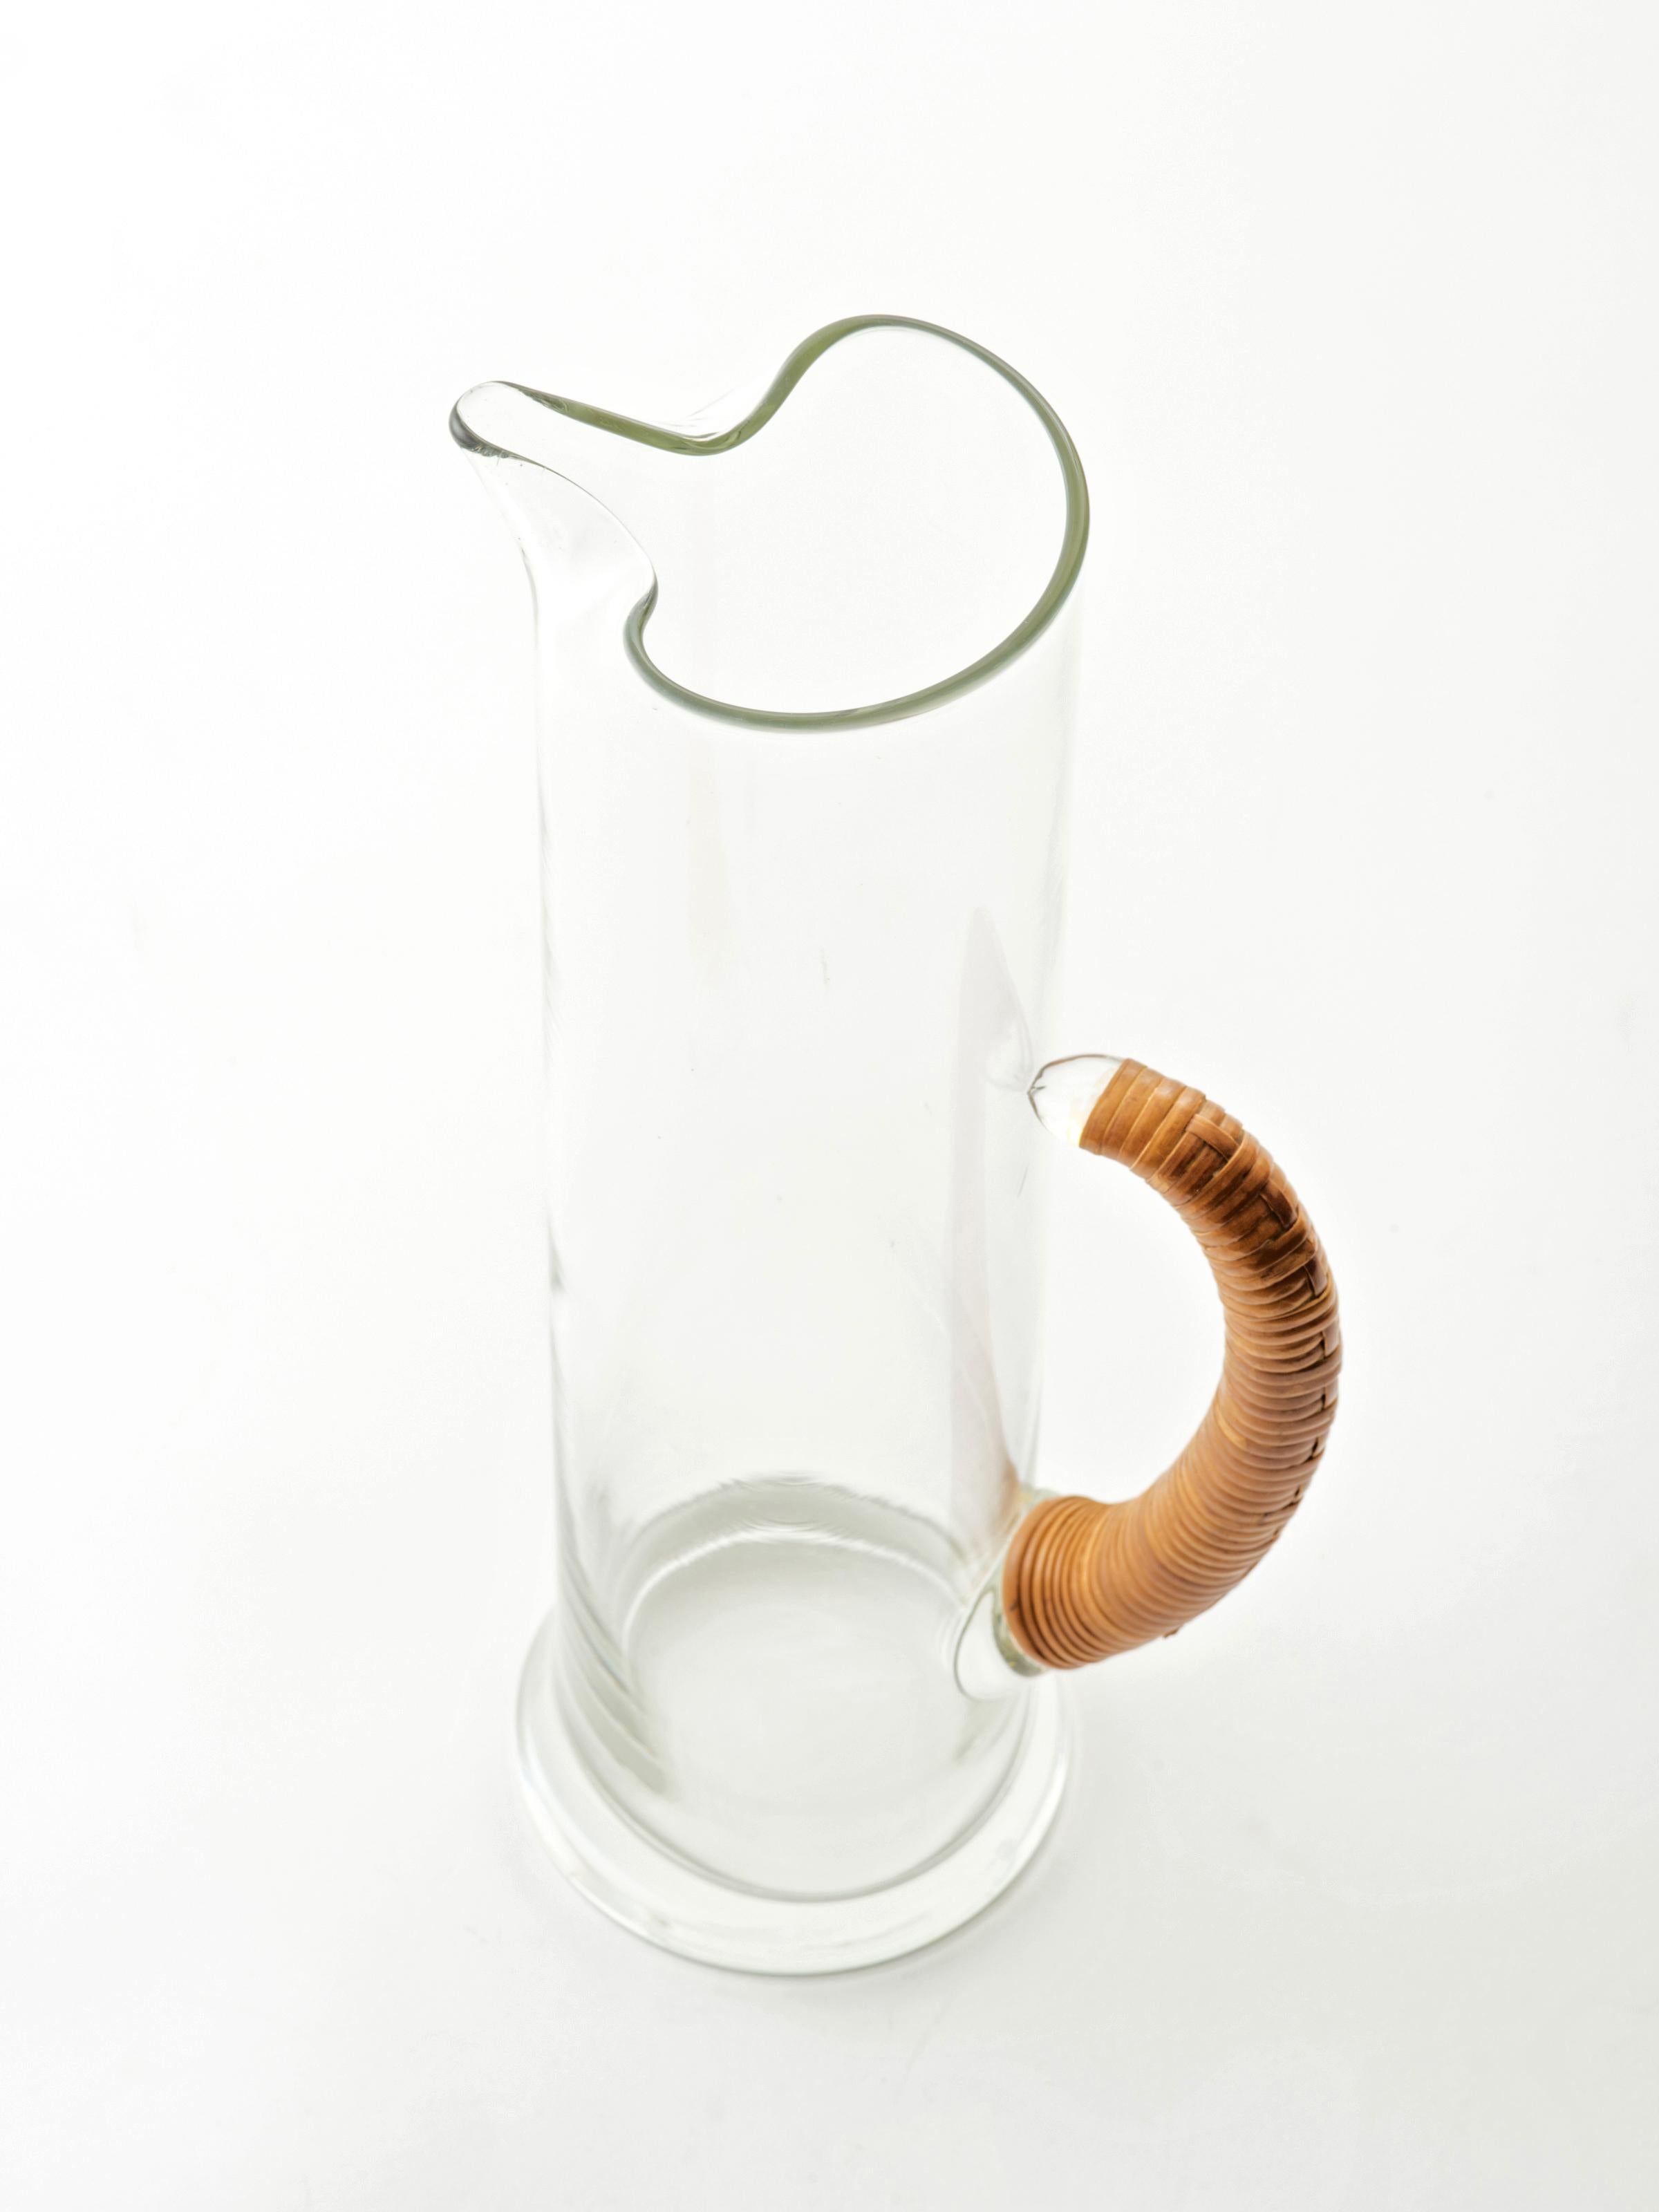 A tall and thin glass pitcher with a cane wrapped handle that's deceptively attached only at the bottom end - - a subtle and elegant design feature. Cane is in great condition with a warm patina.